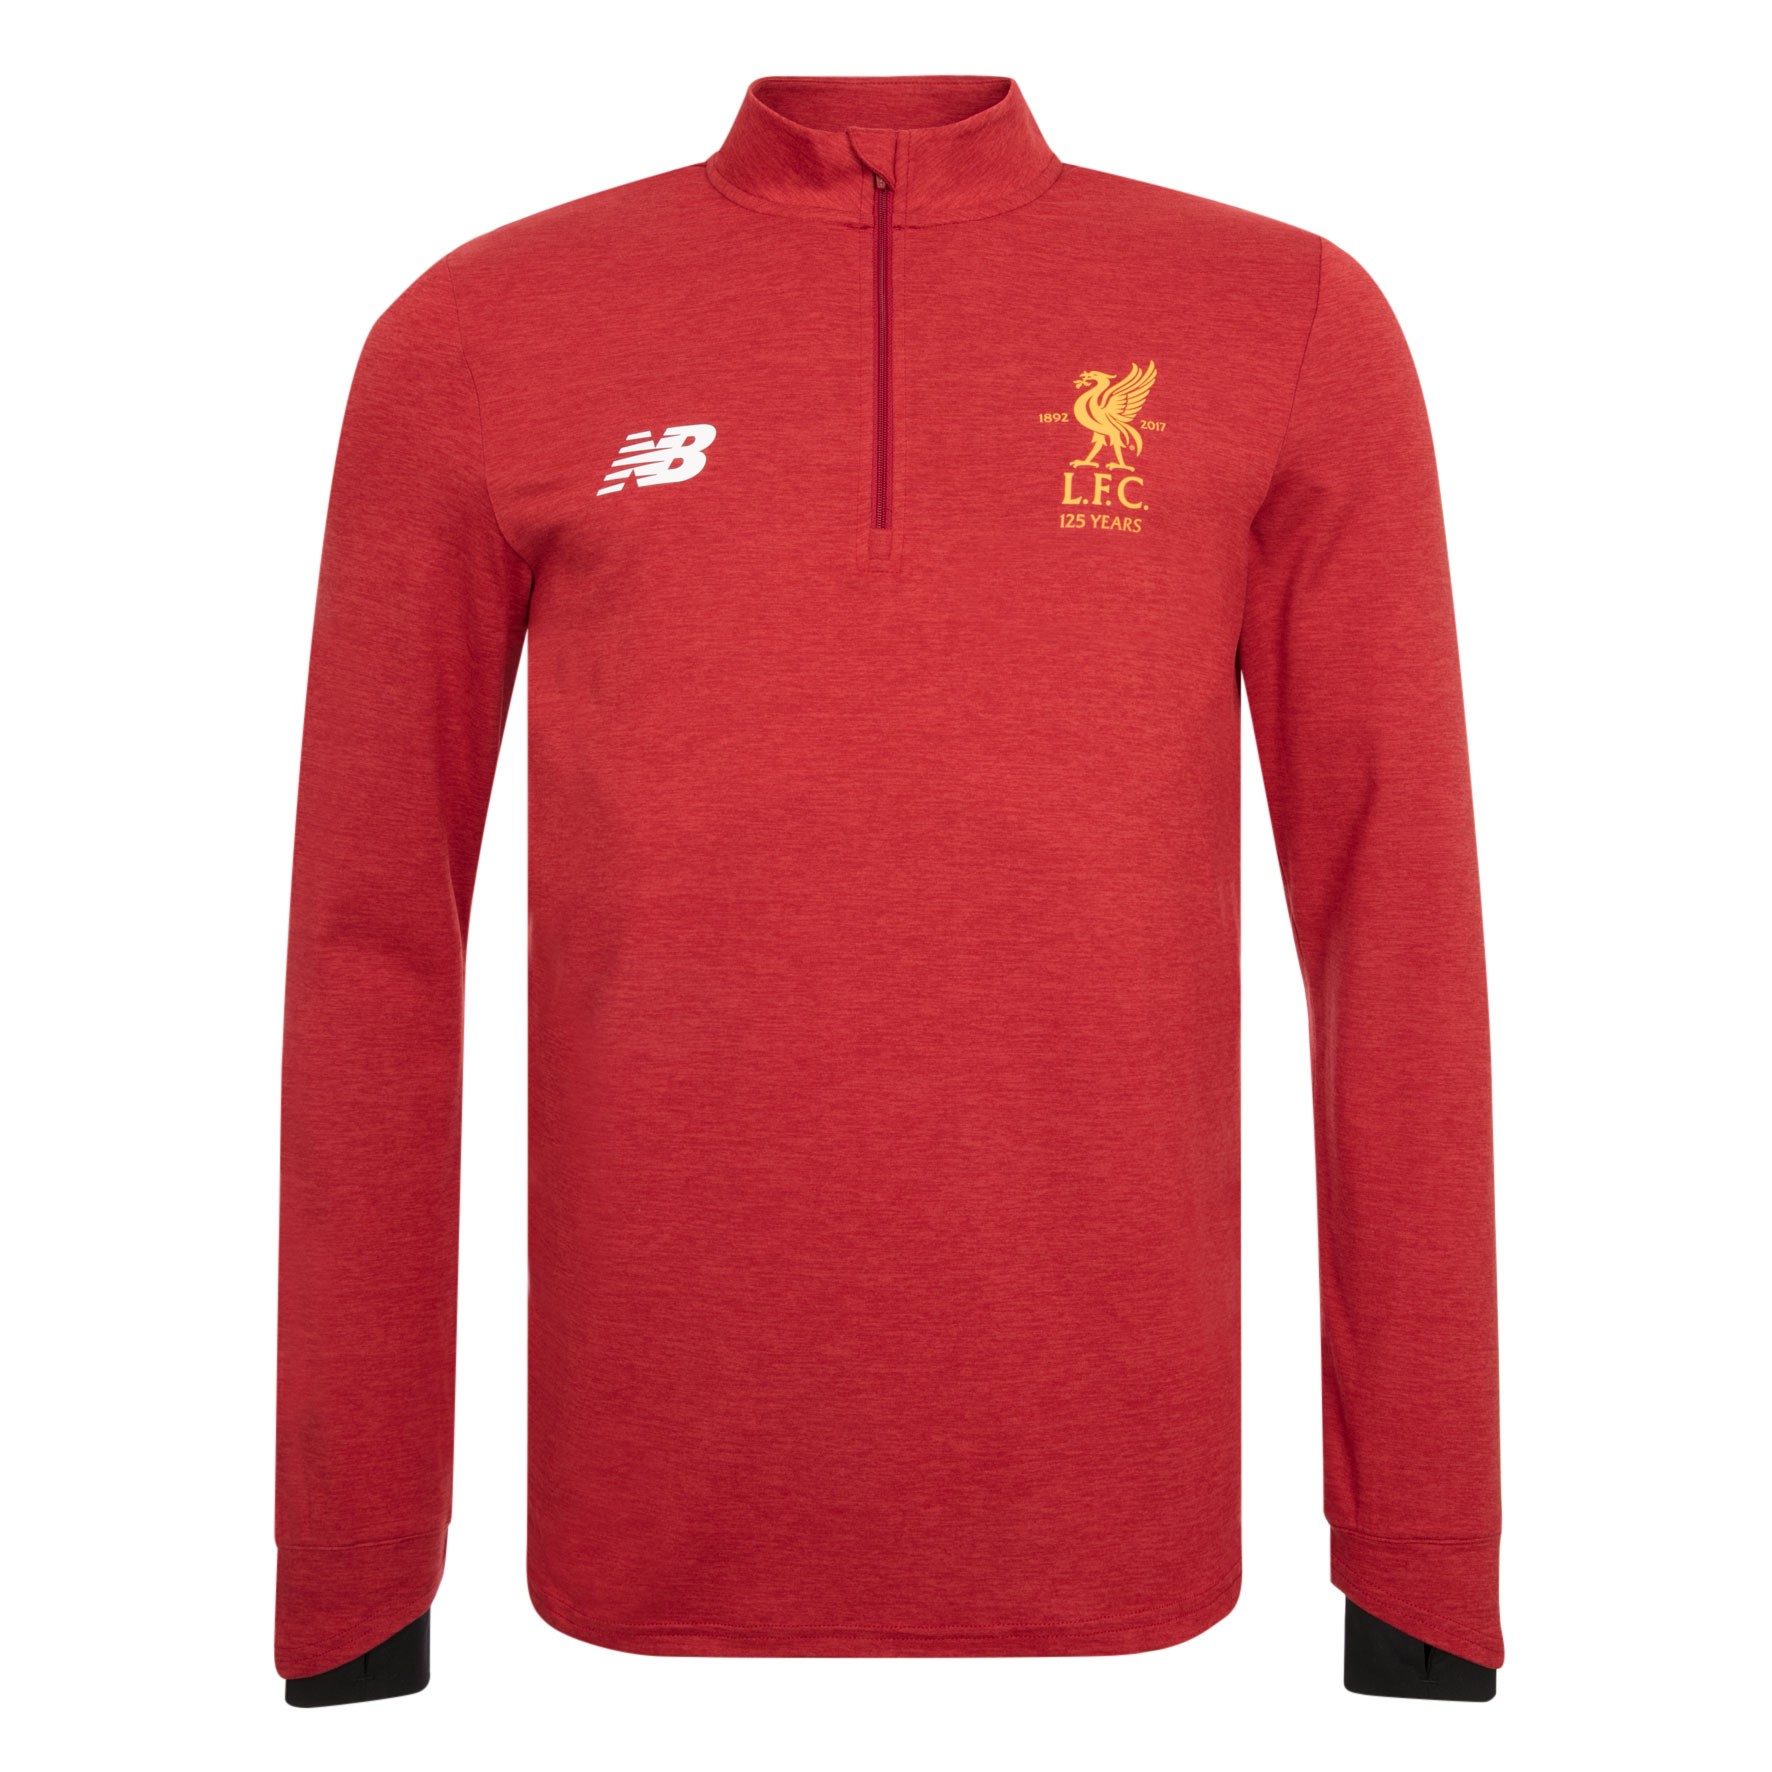 LFC Junior Red Pepper Marl Training Mid Layer Top 17/18